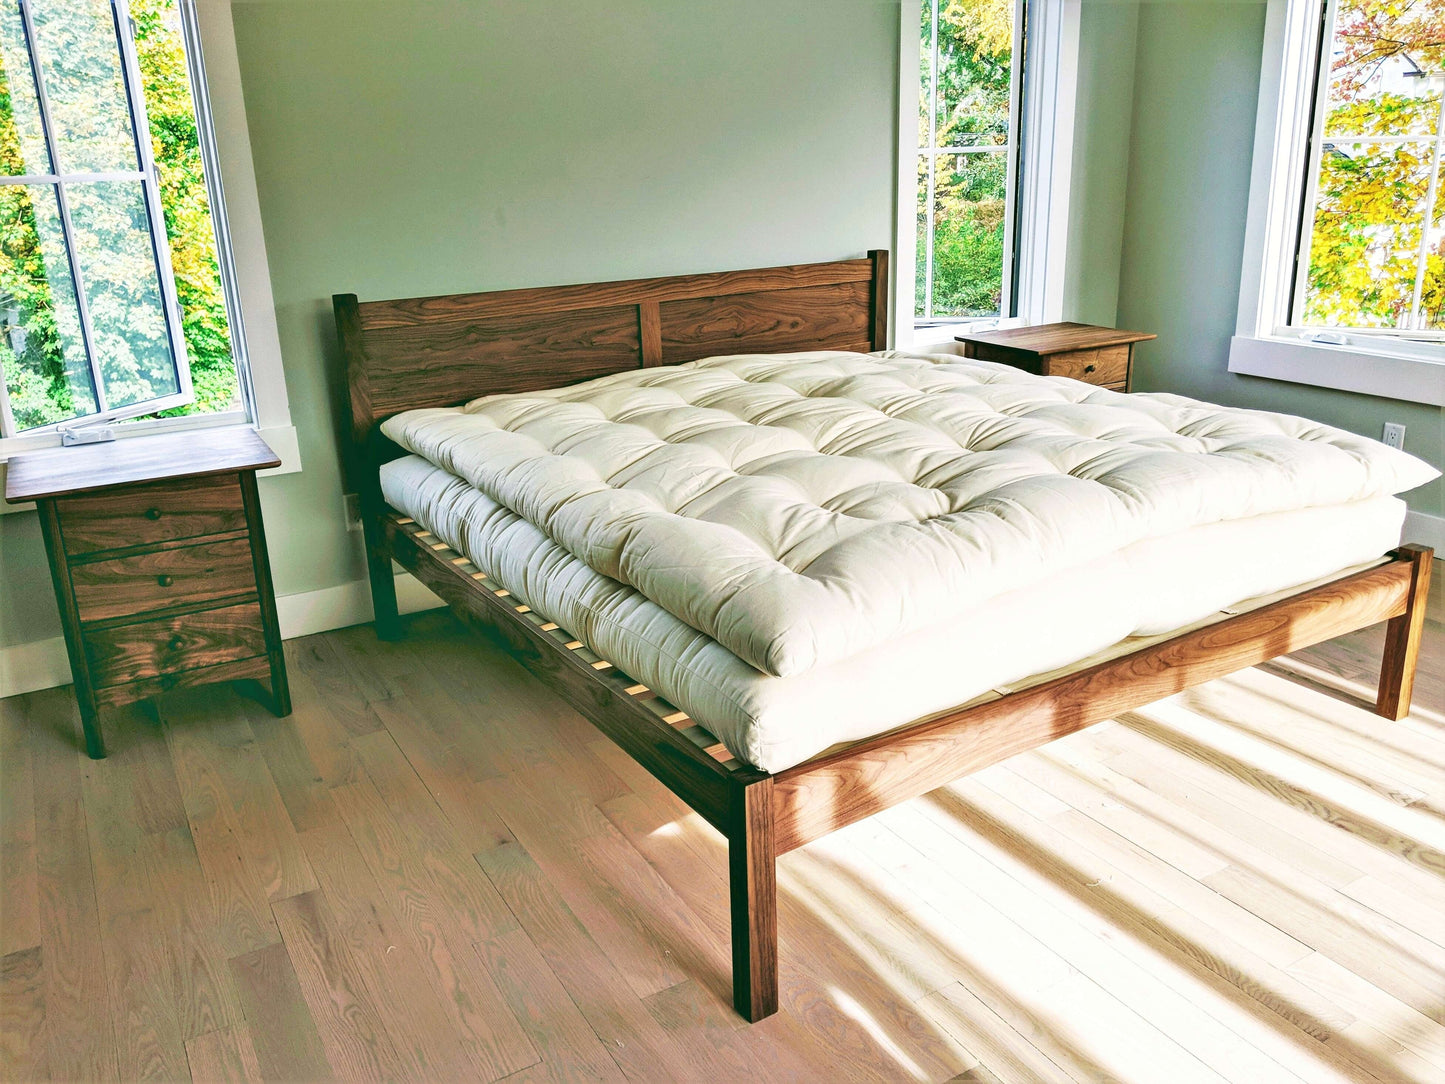 wool-topper-on-bed